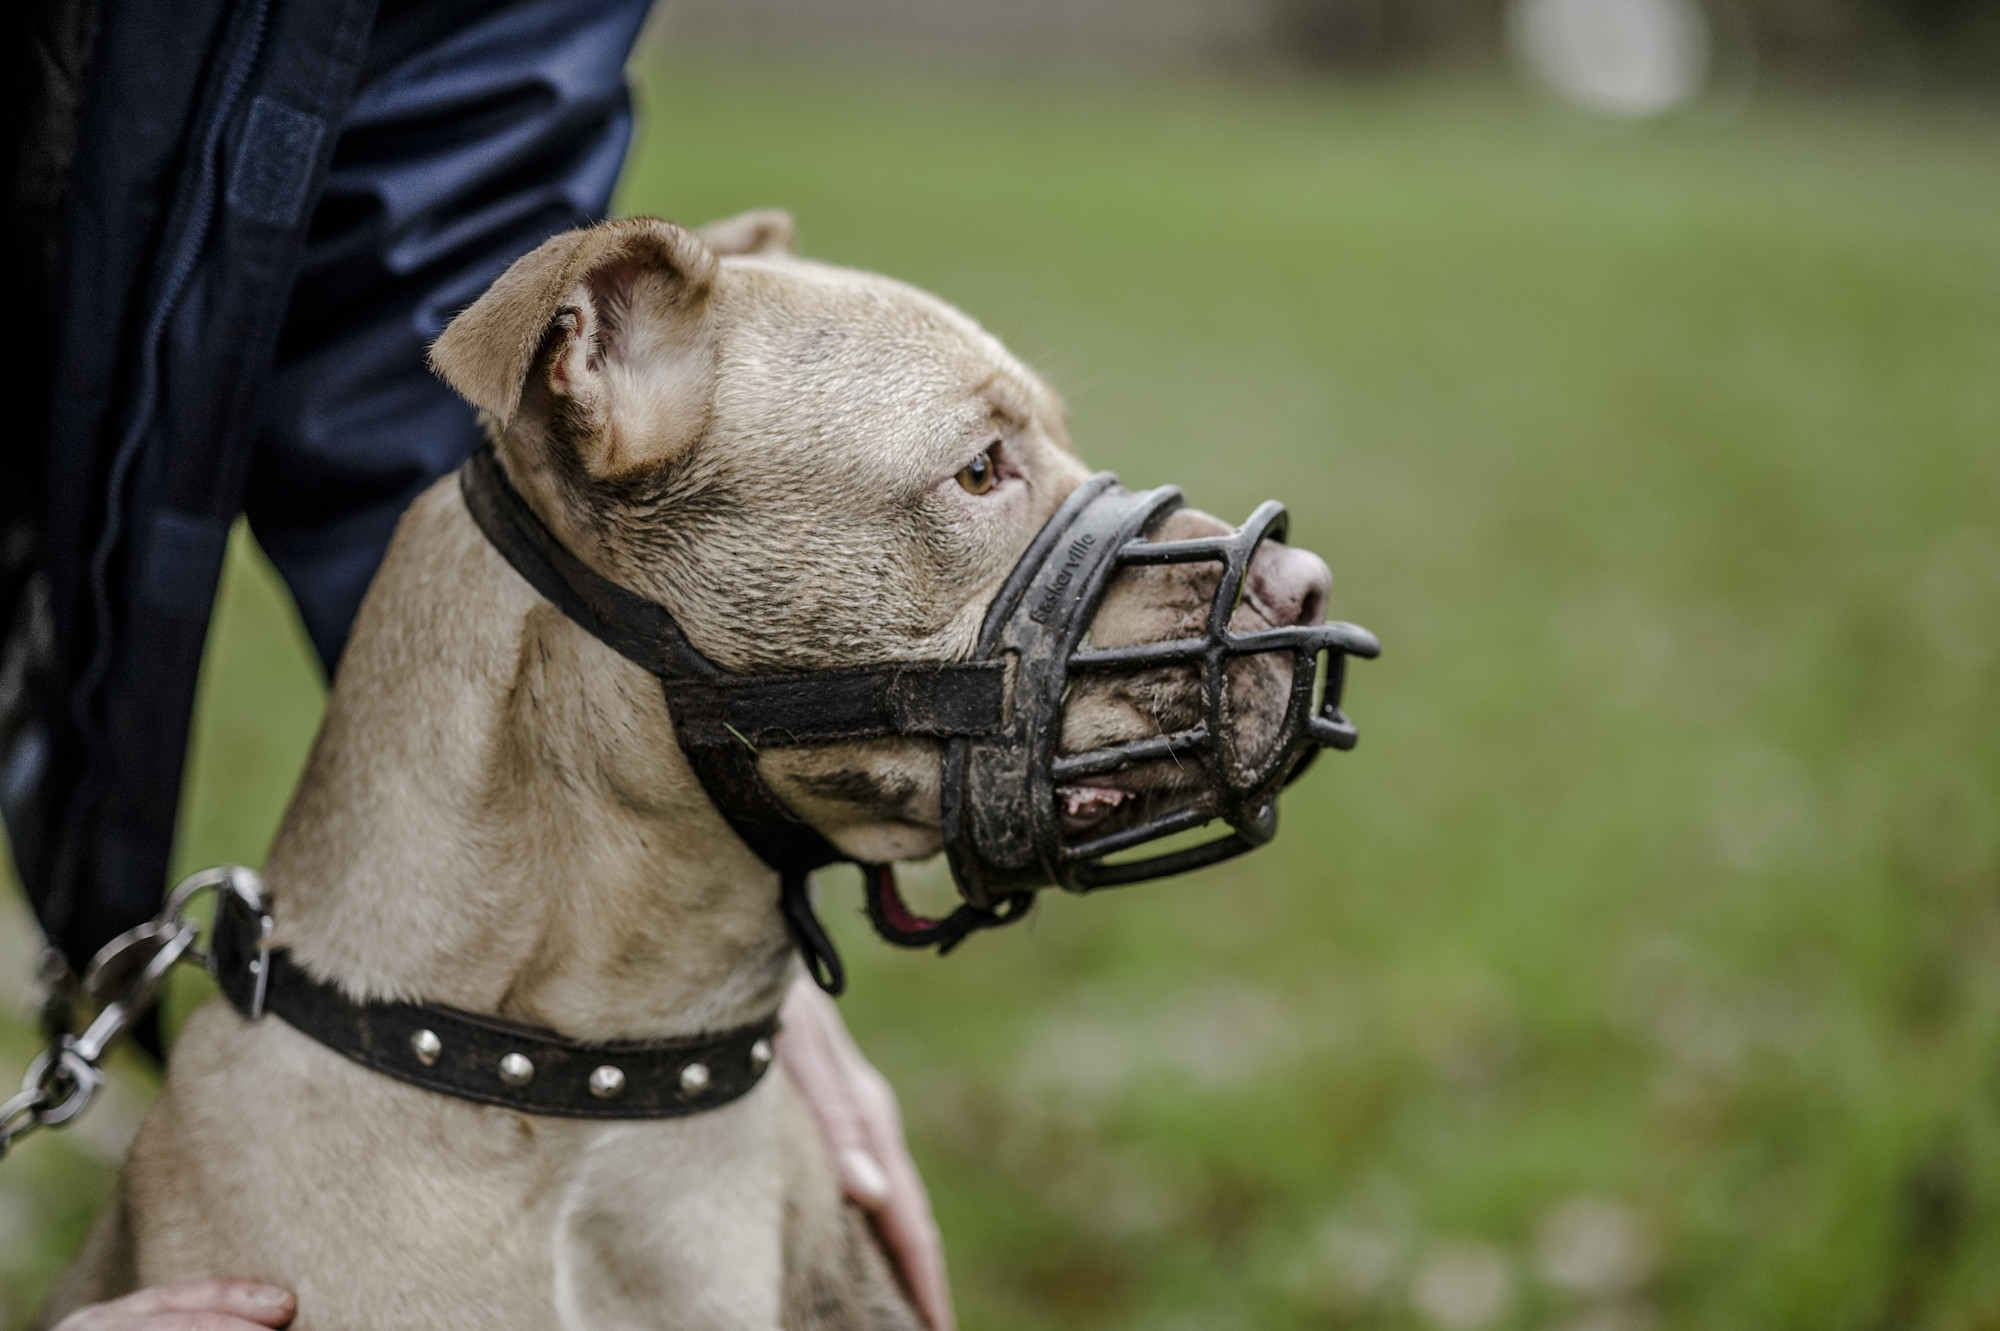 using a muzzle on a puppy